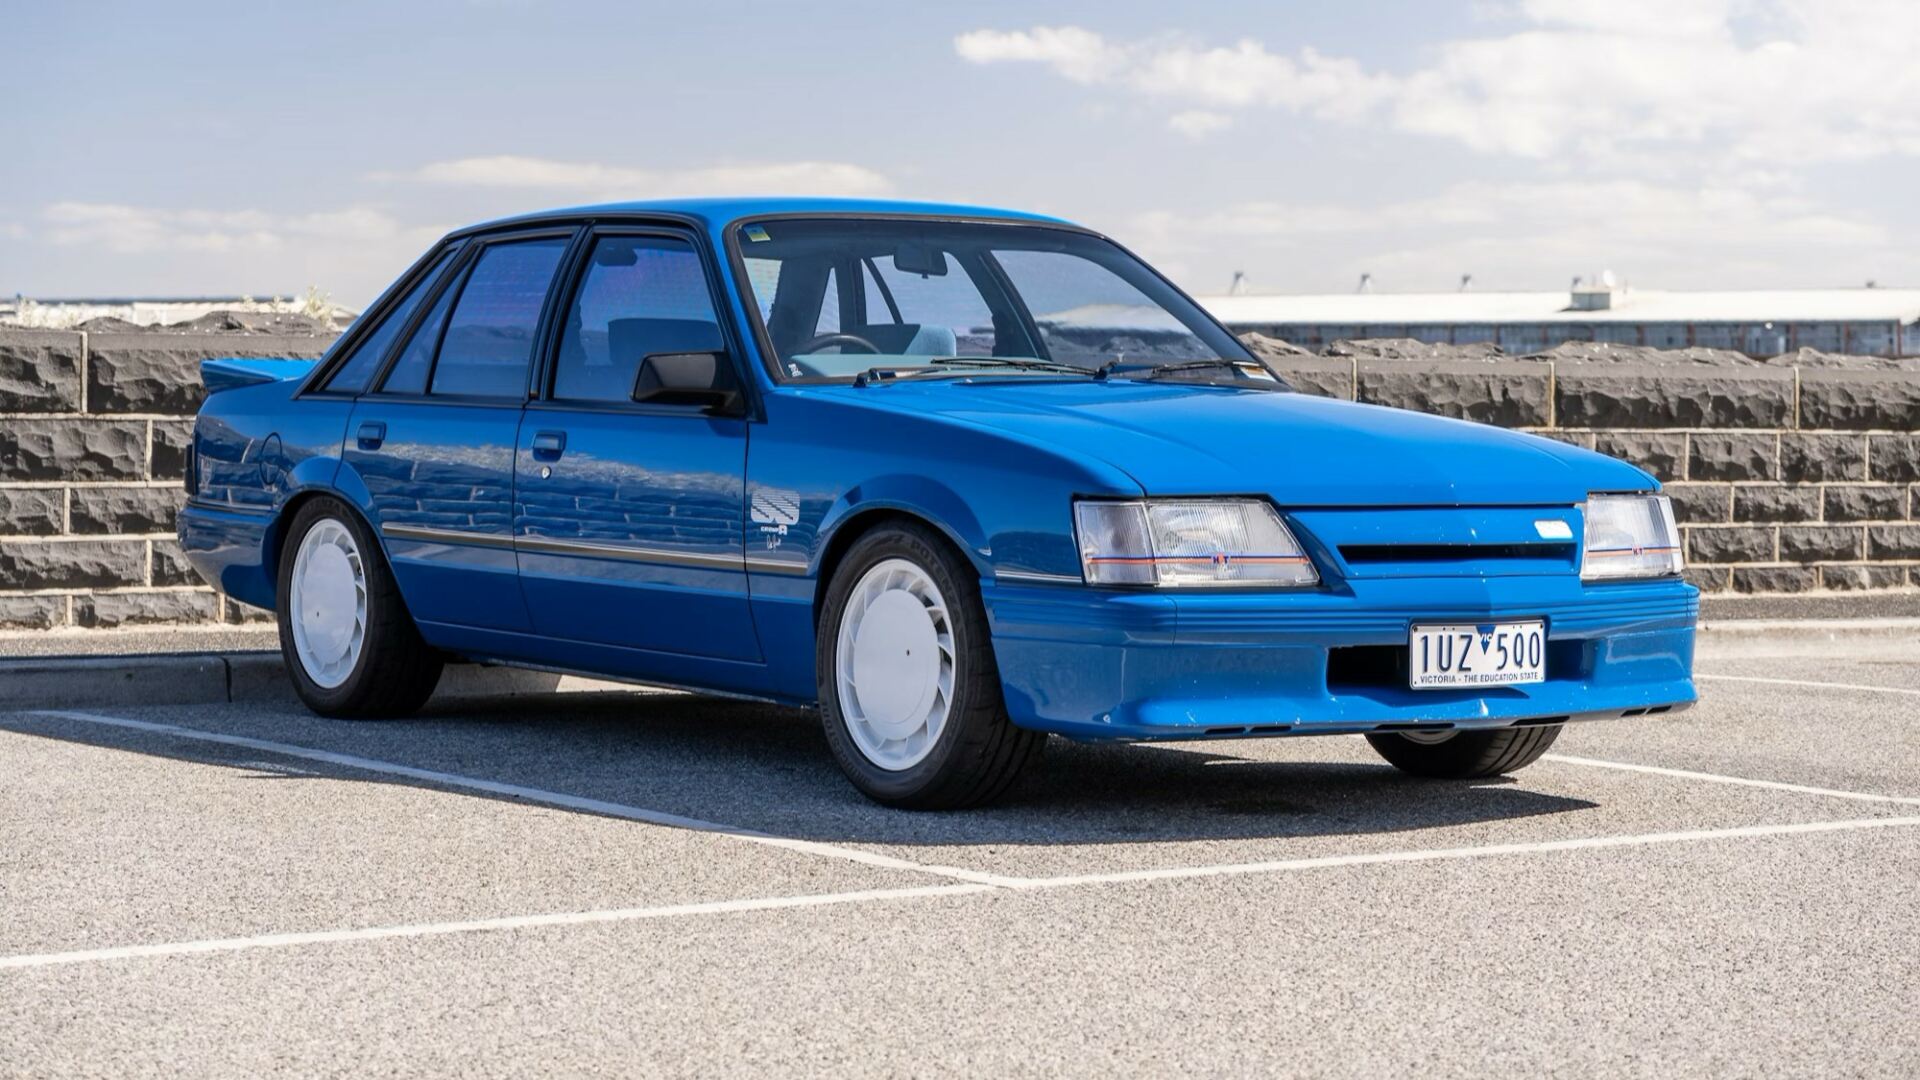 Peter Brock's Holden Commodore VK Thats On Auction (Credits Collecting Cars)